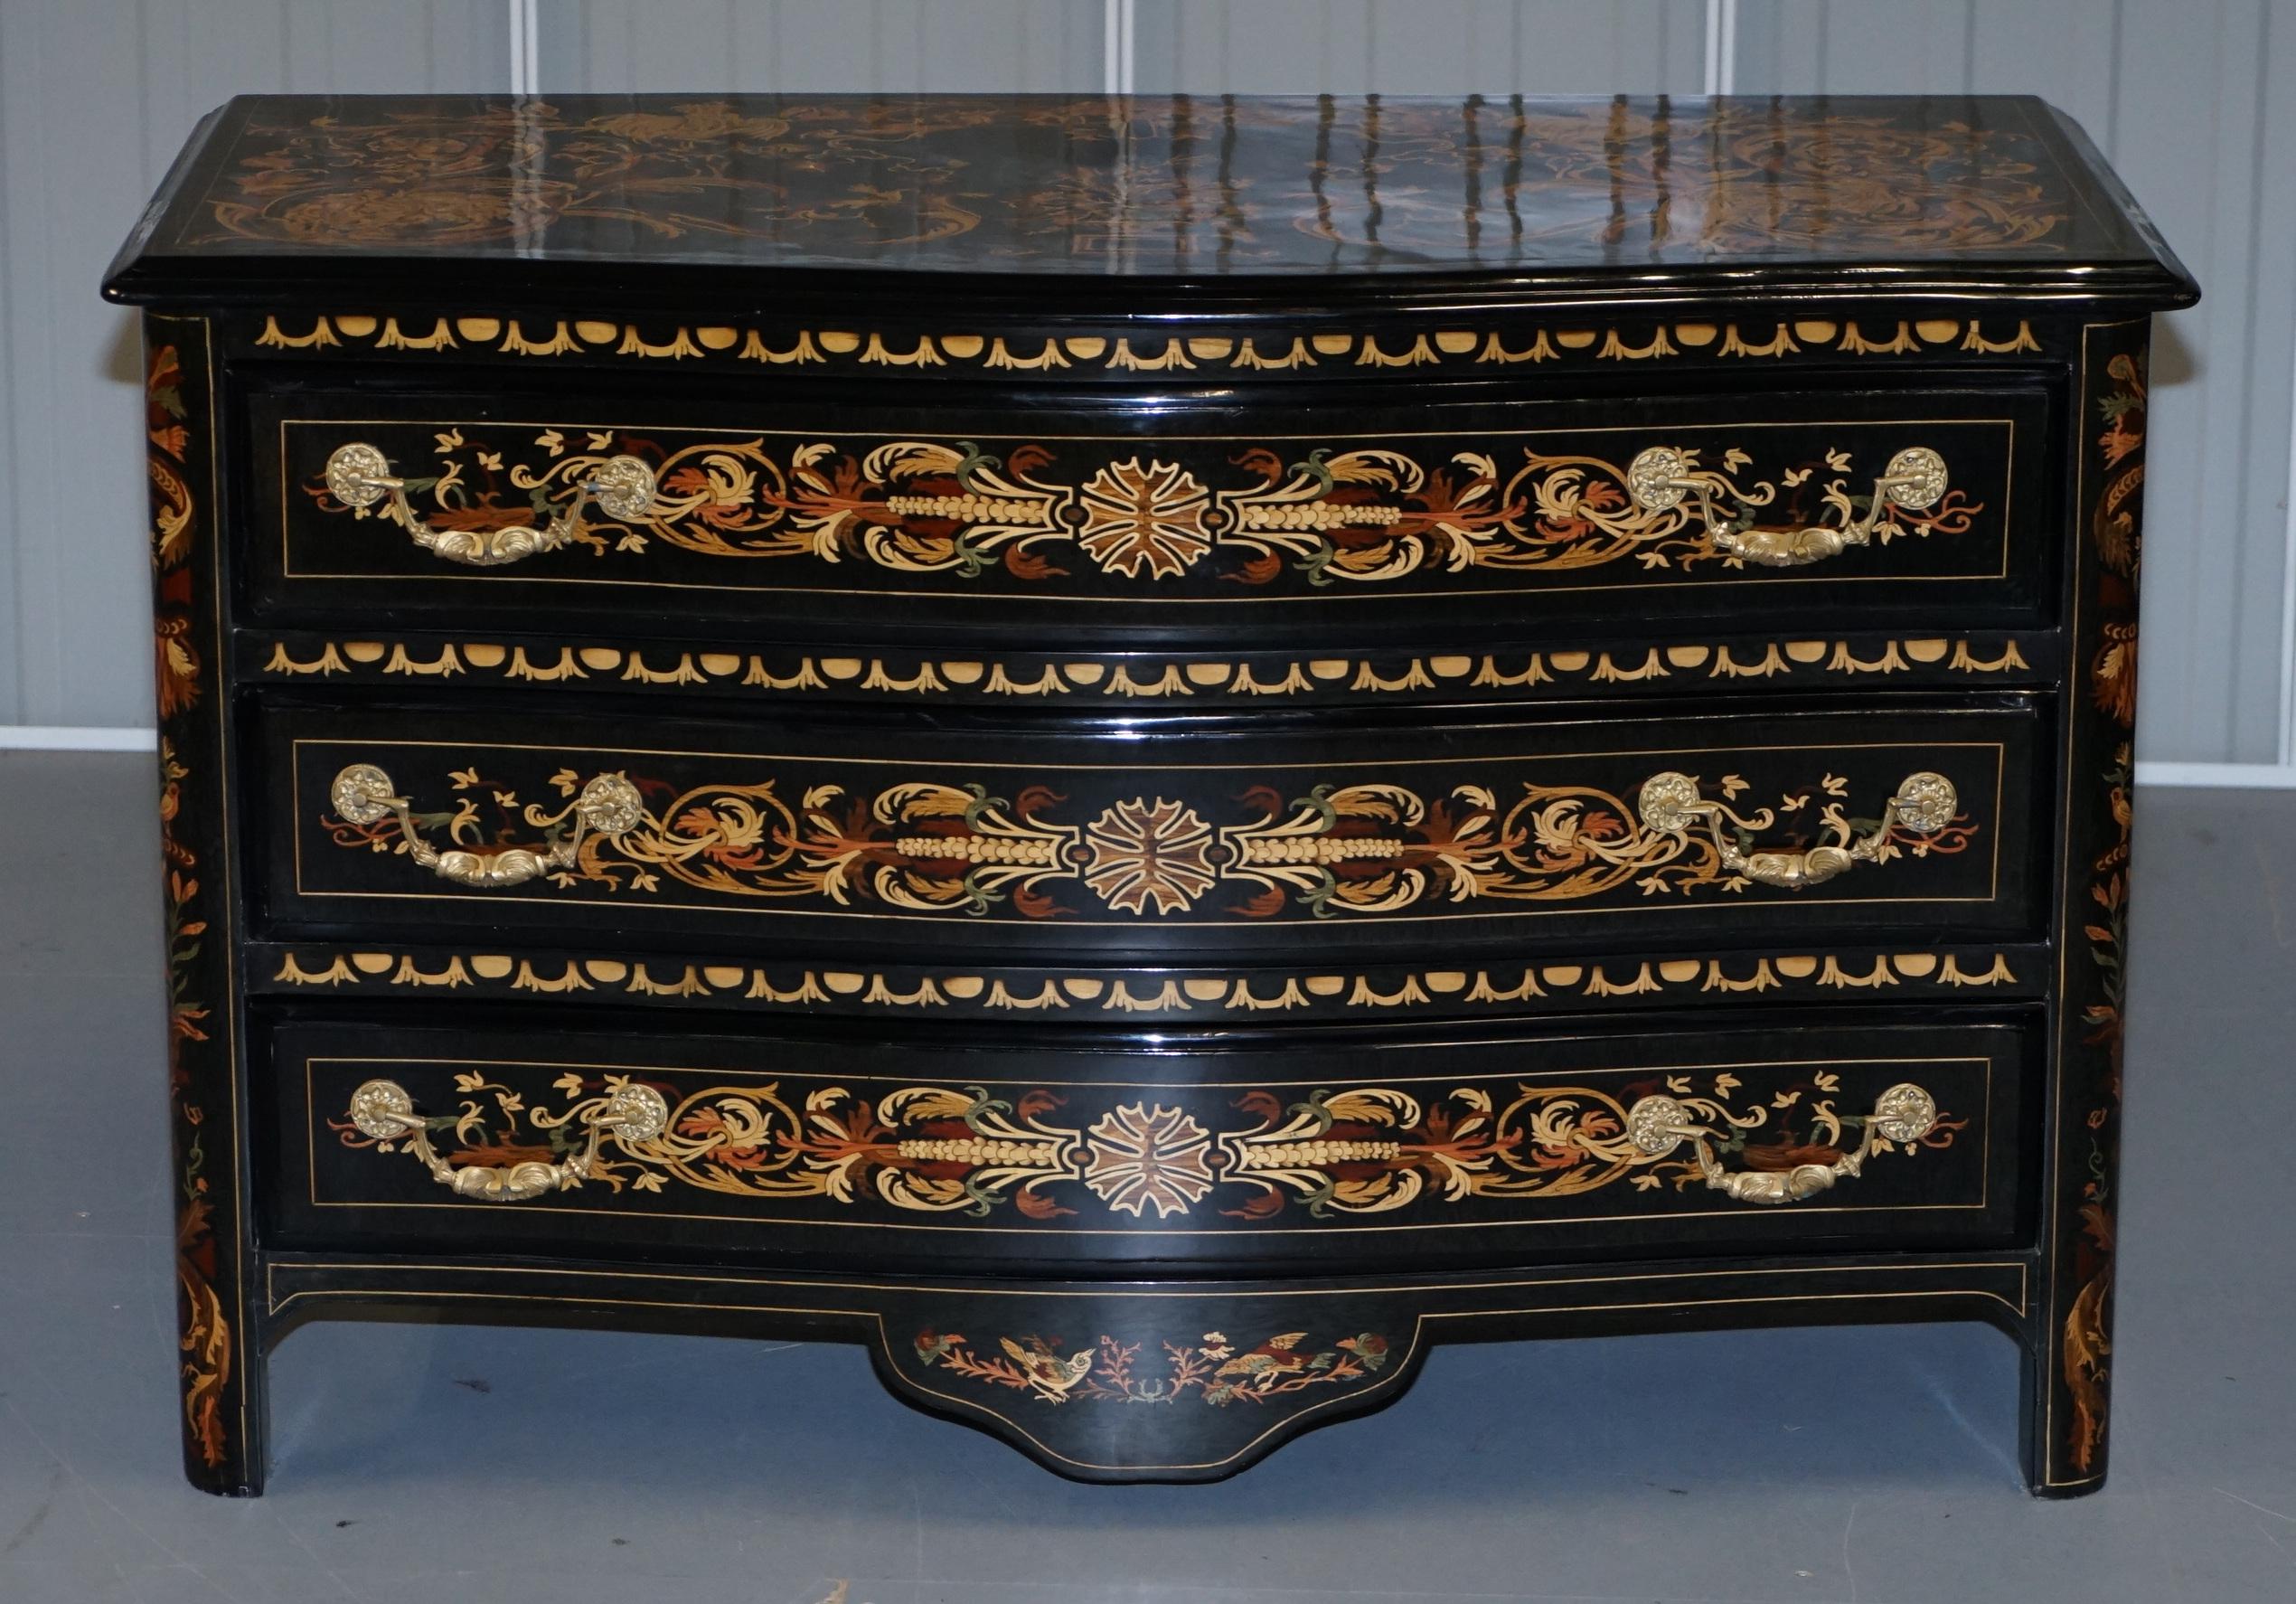 We are delighted to offer for sale this extremely ornate black lacquered chest of drawers with Italian Marquetry inlay 

A truly stunning chest of drawers, the top depicts a lions main, a cockerel an urn on a plinth and various floral waves, the